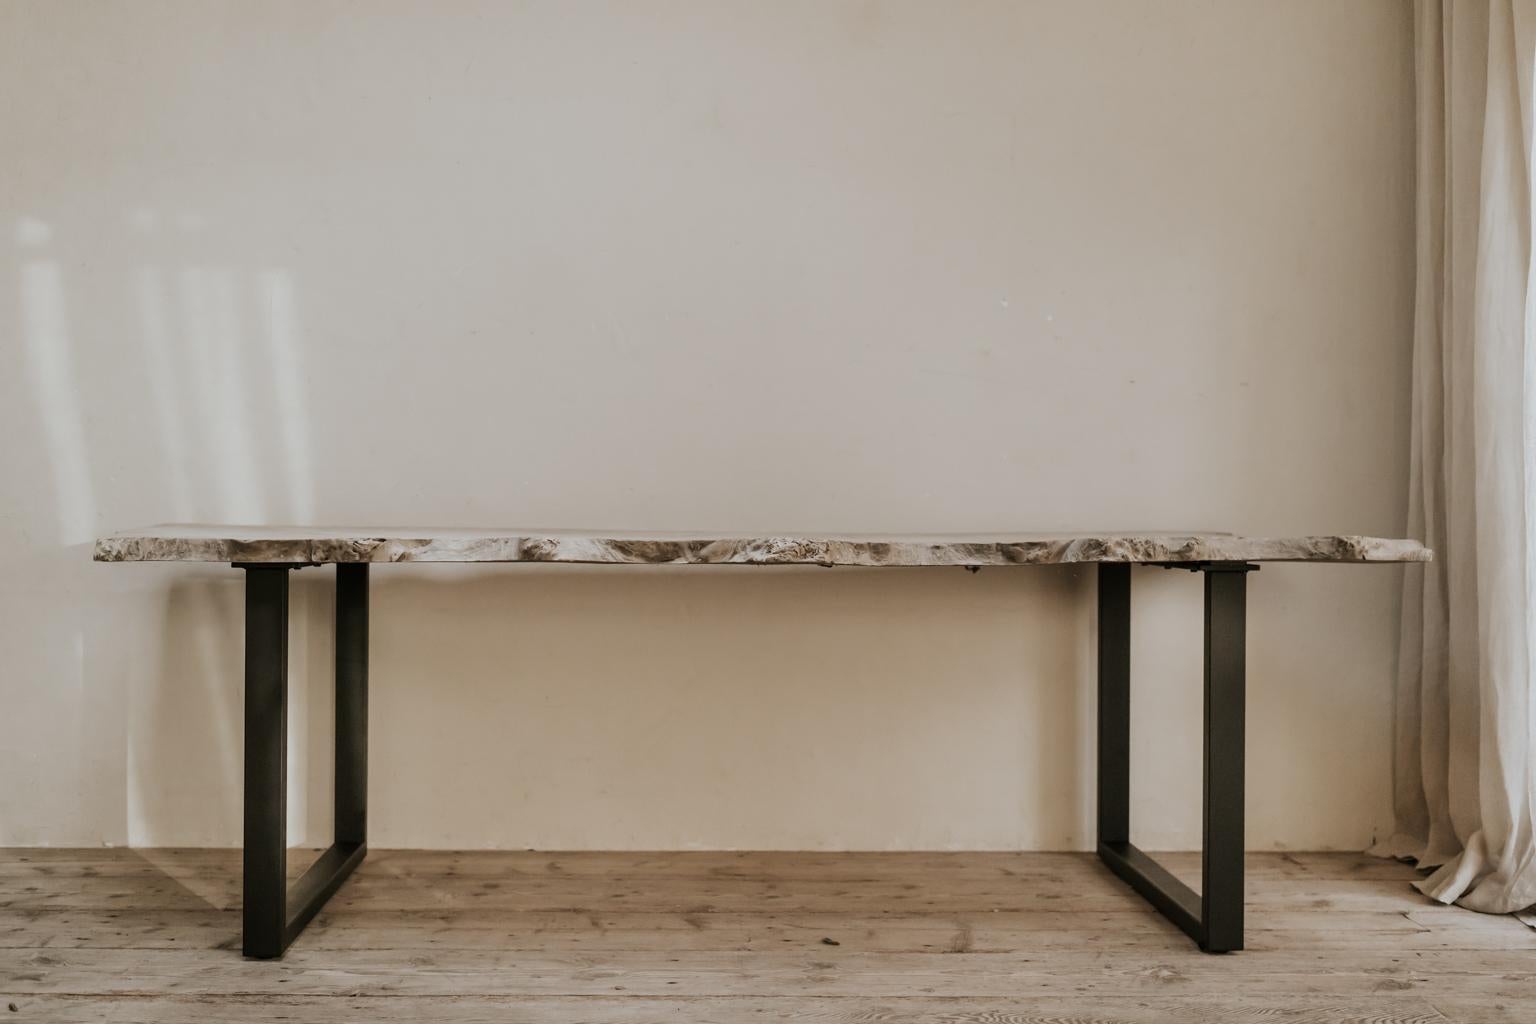 We used an extra large antique Spanish single piece of poplarwood slab to create this quirky table, mounted it on a contemporary iron base, makes a wonderful dining table, desk or conference table...